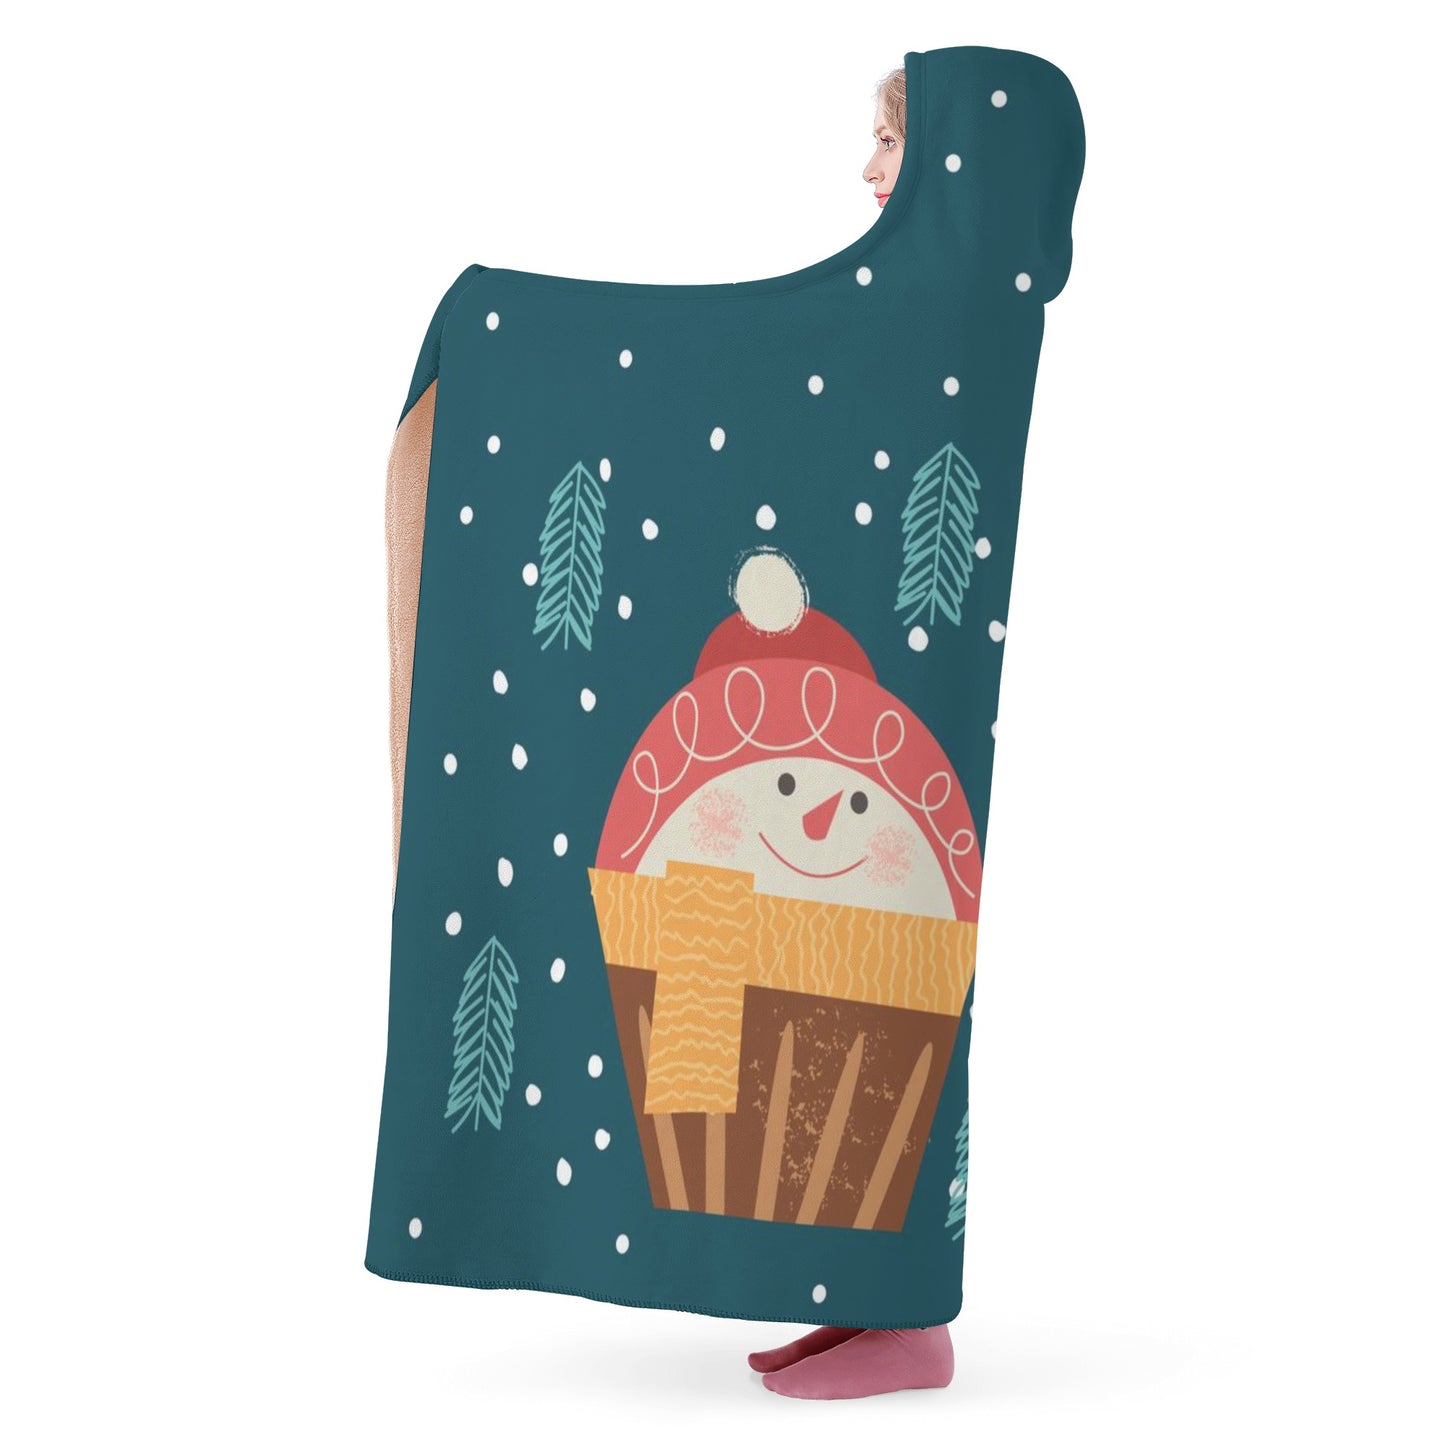 Christmas Cake with Mrs. Claus and Santa Hooded Blanket